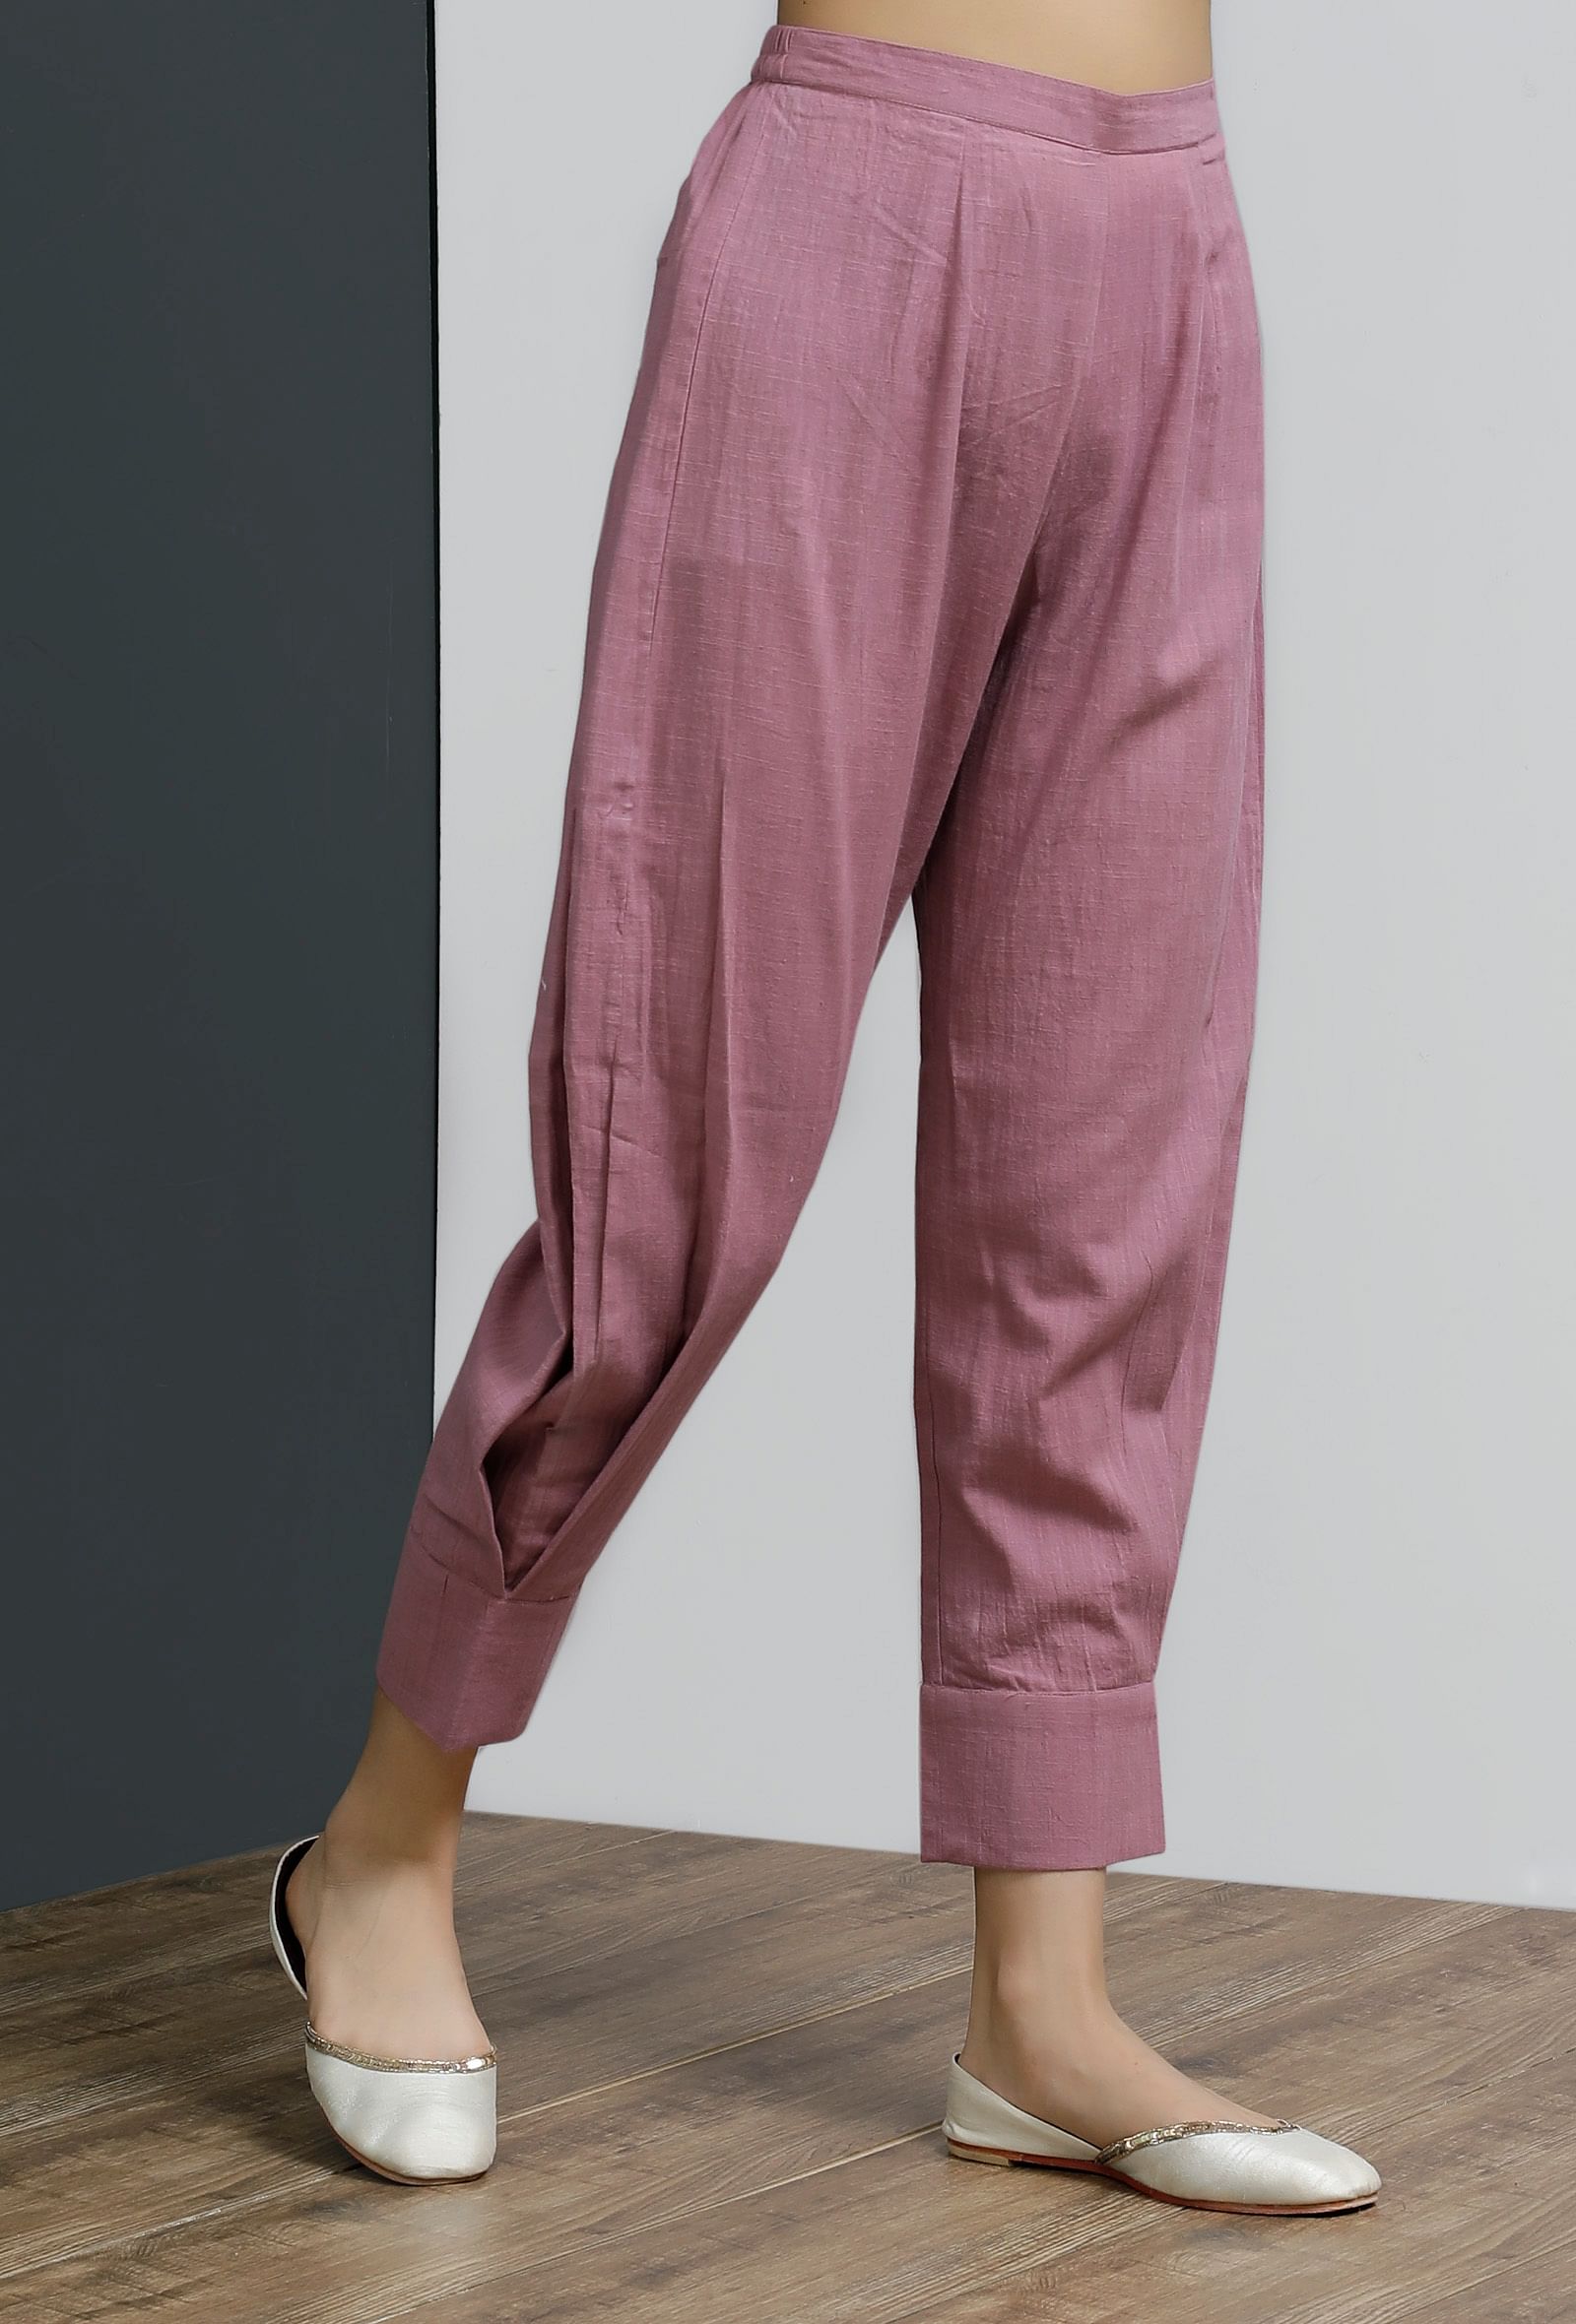 Solid Onion Pink Side Pleated Pants